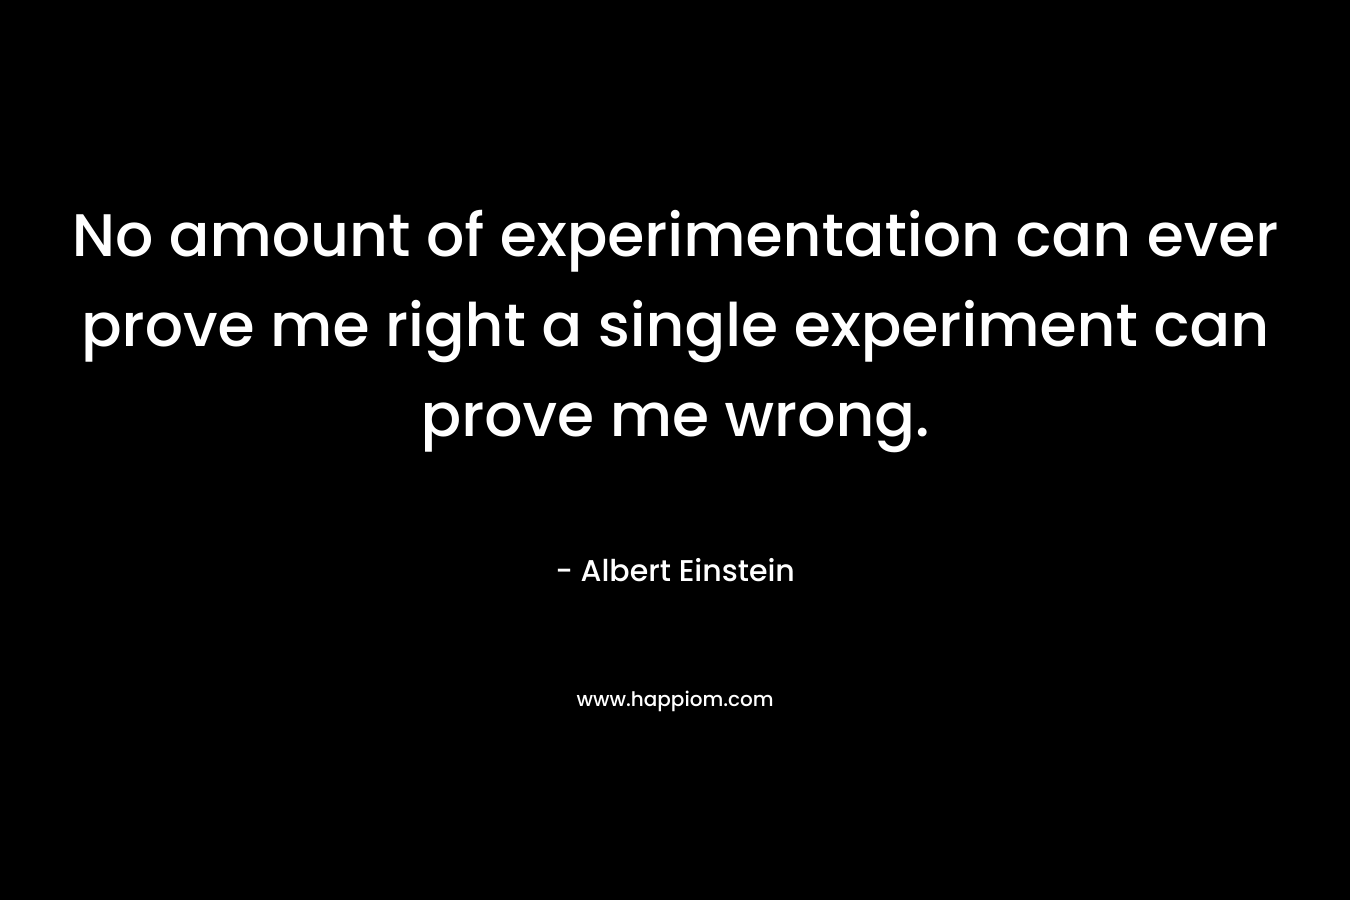 No amount of experimentation can ever prove me right a single experiment can prove me wrong.